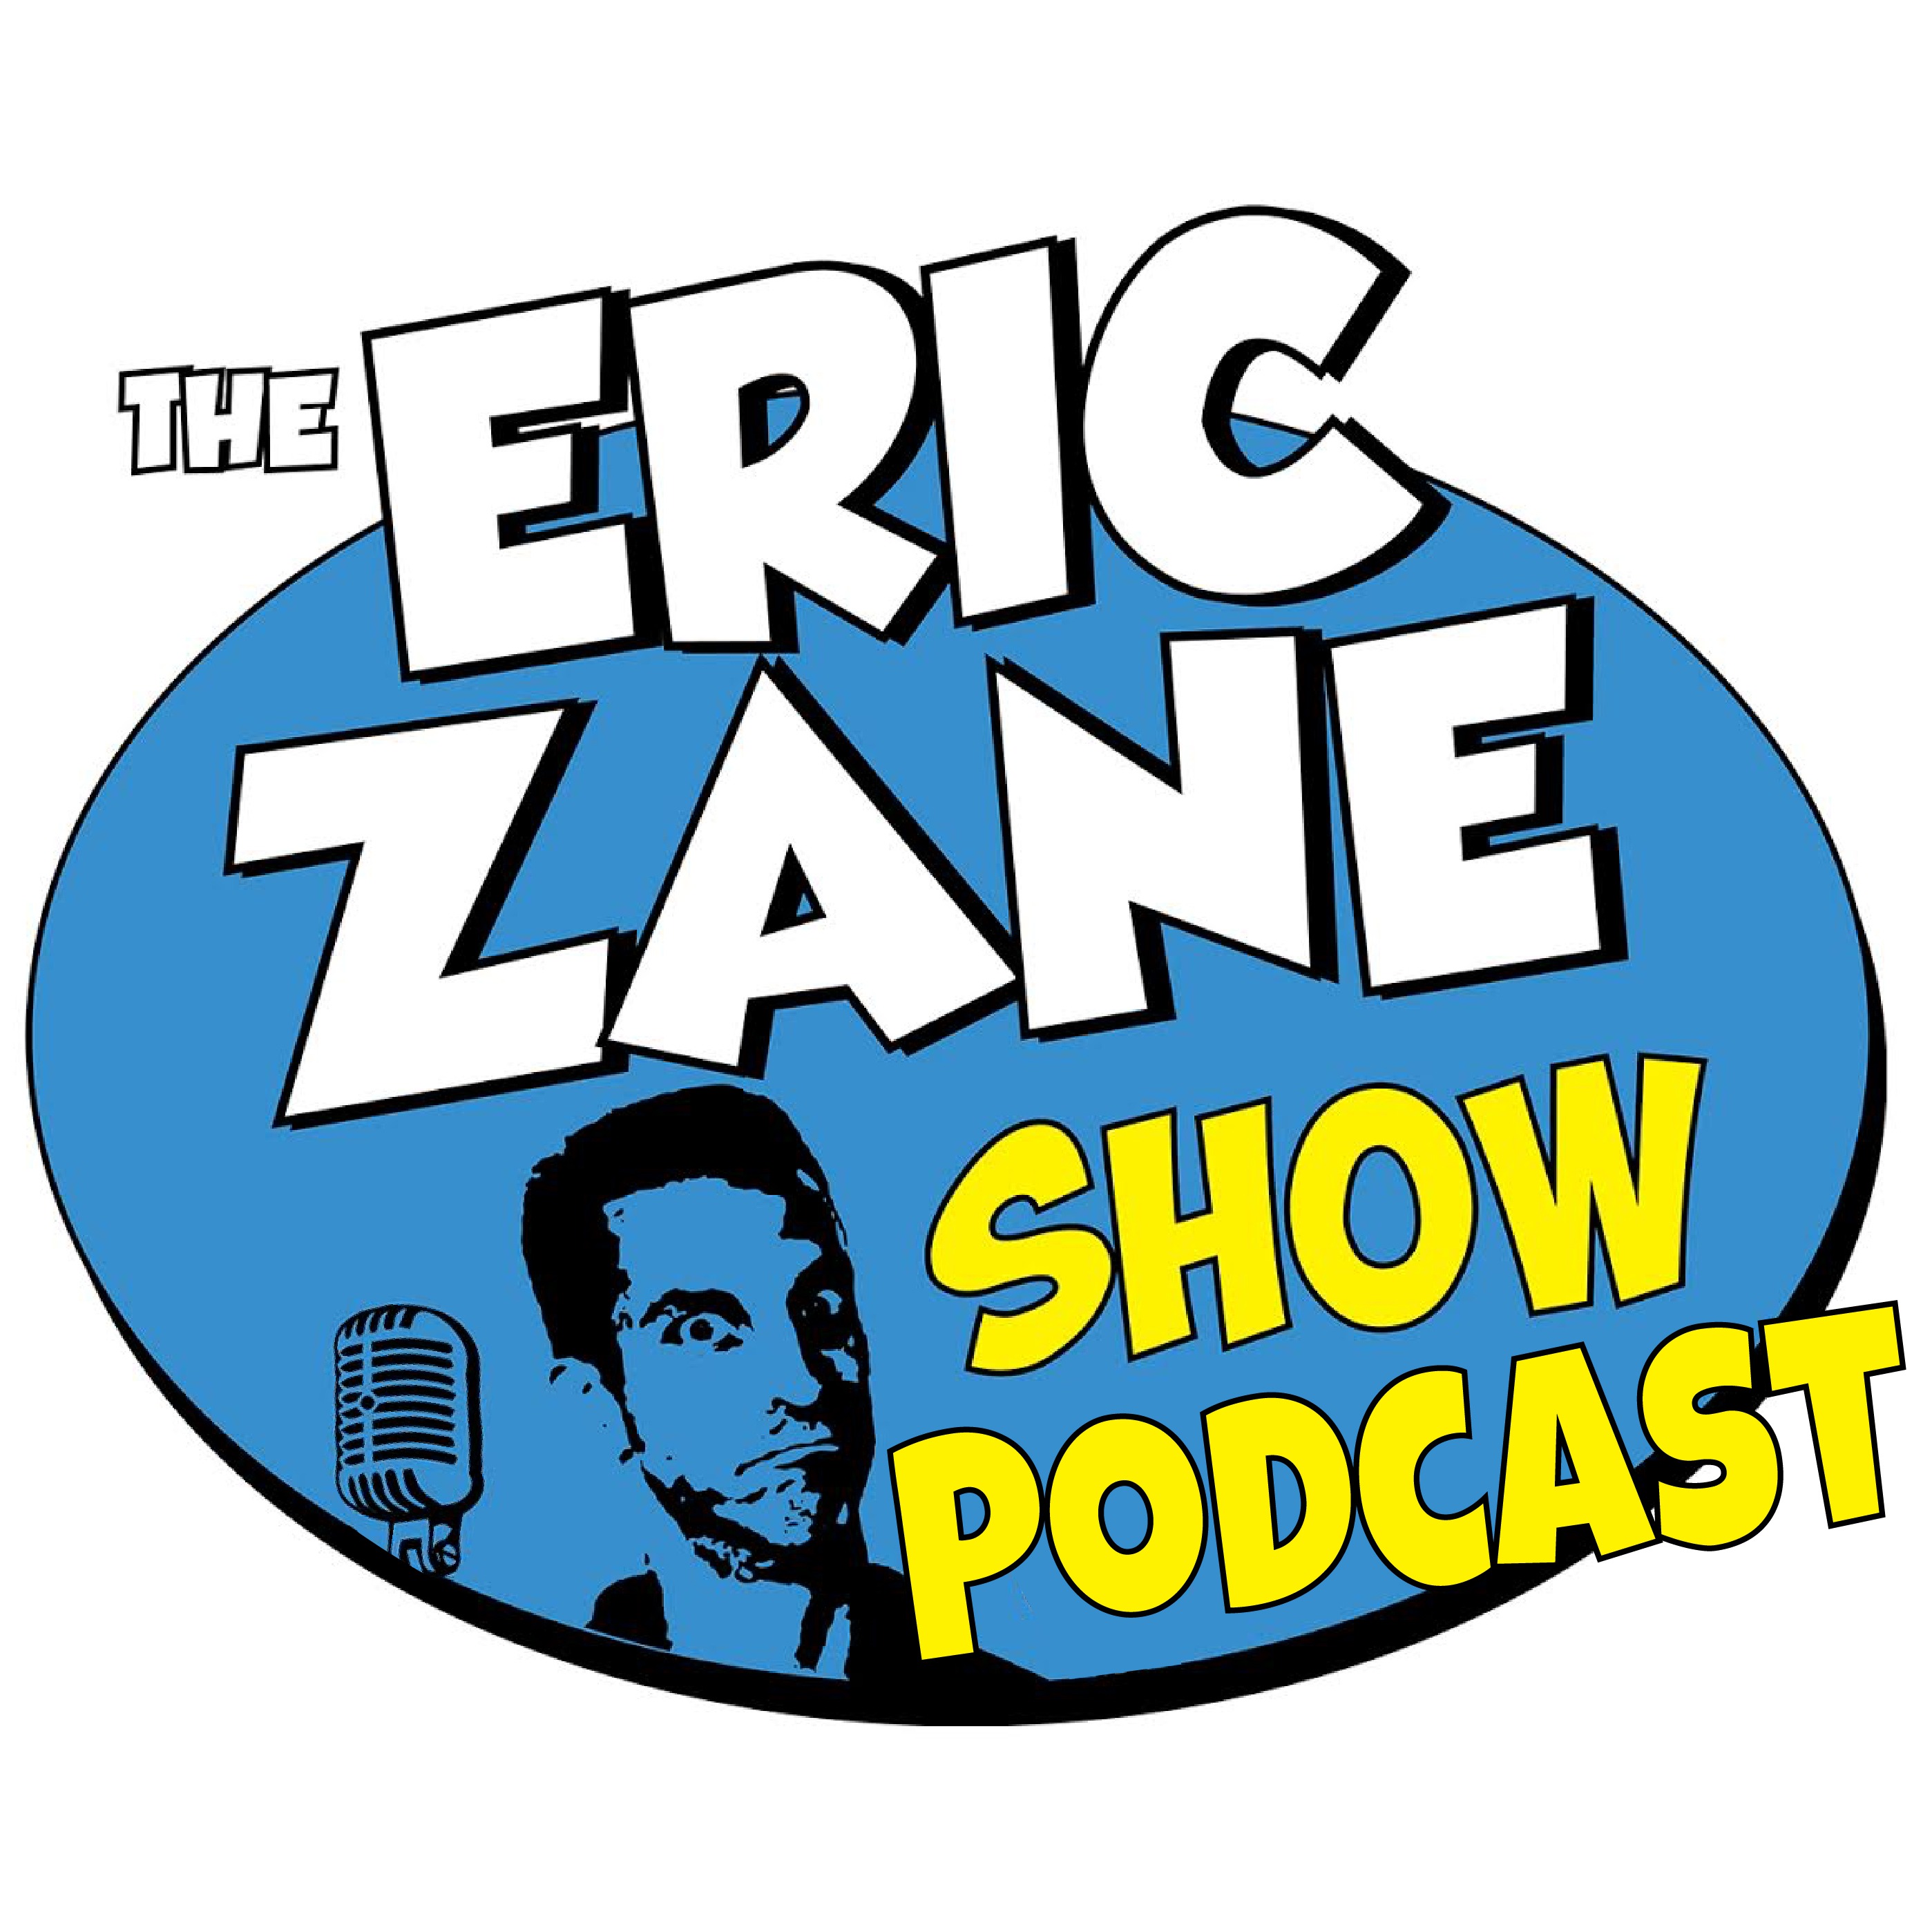 Eric Zane Show Podcast 861 Who knew oil on the windshield causes cancer?